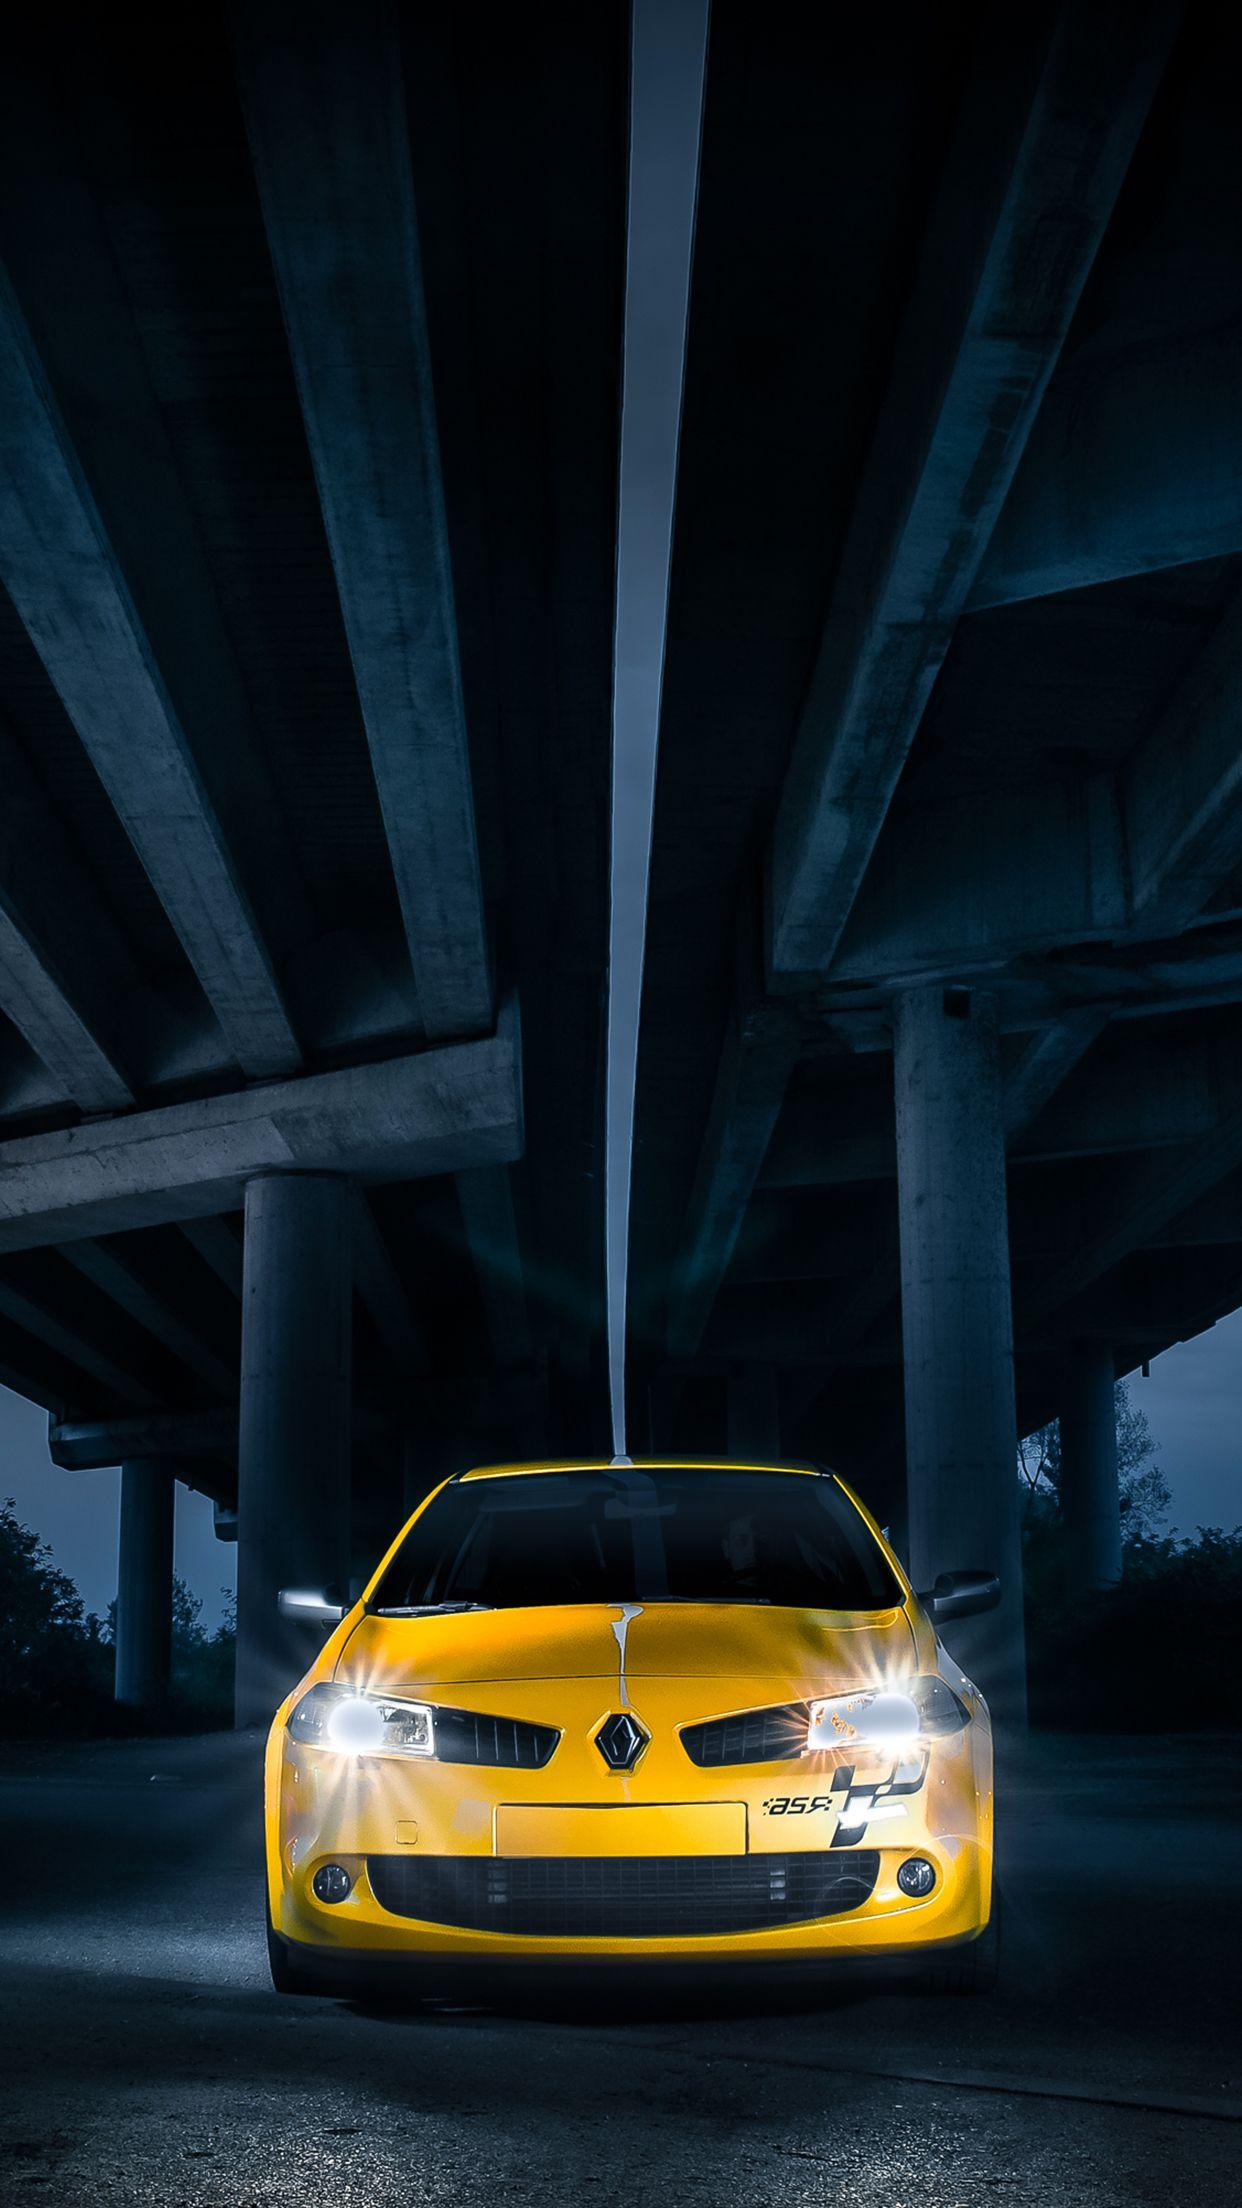 Megane 2 RS Wallpaper for iPhone X, 6